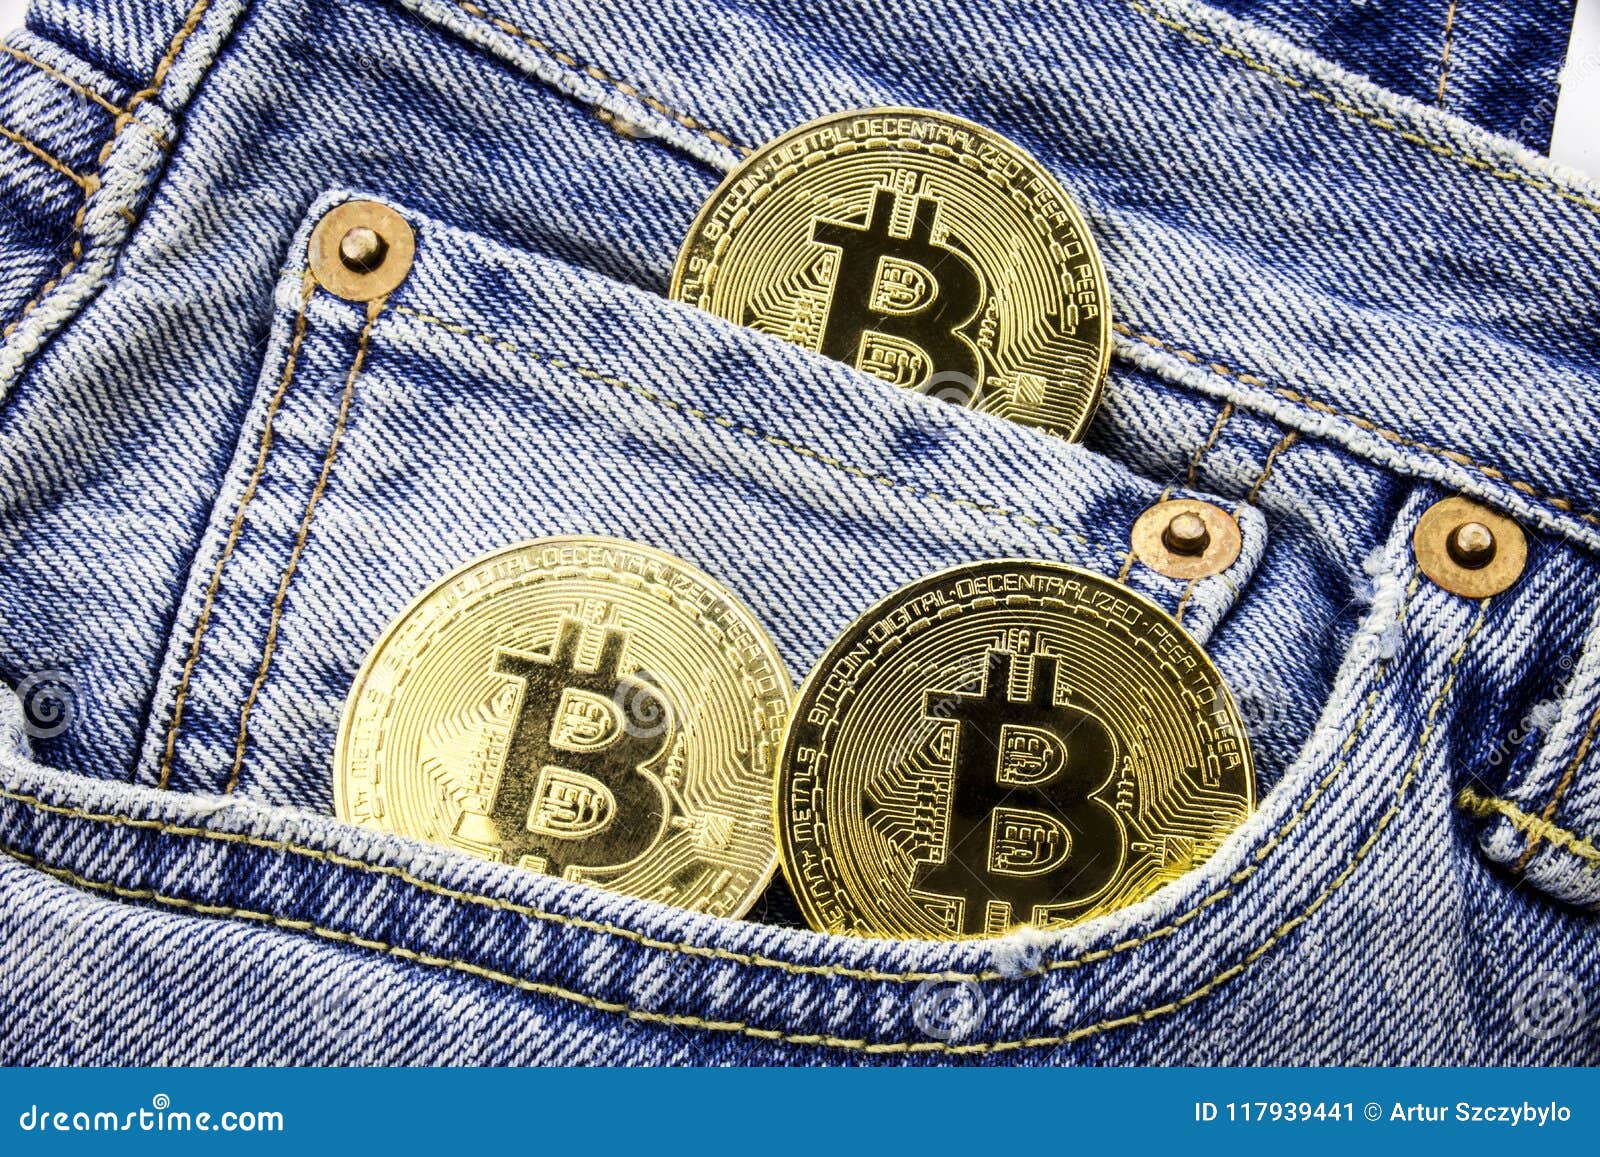 Three Golden Bitcoin Coins On The Pockets Of The Jeans Concept Of - 